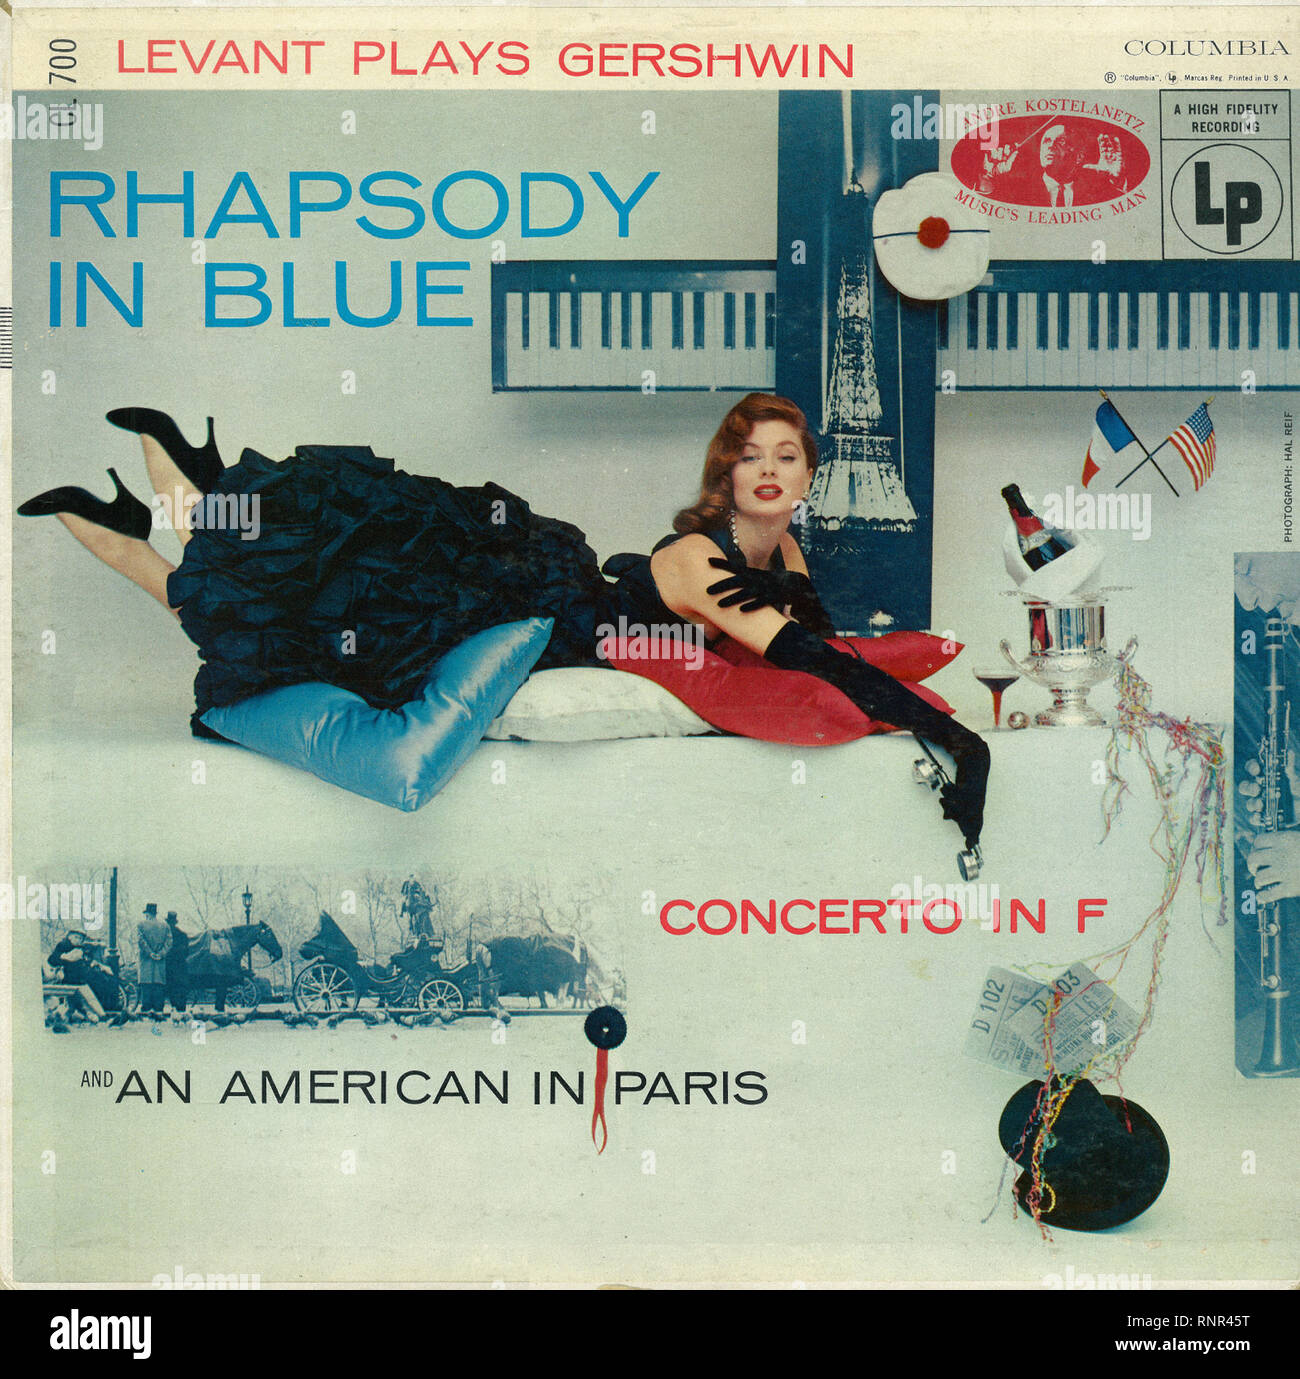 Vintage Vinyl Lp Cover Levant Plays Gershwin Rhapsody In Blue Oscar Levant Andre Kostelanetz Orchestra Model Suzy Parker On Cover 1955 Stock Photo